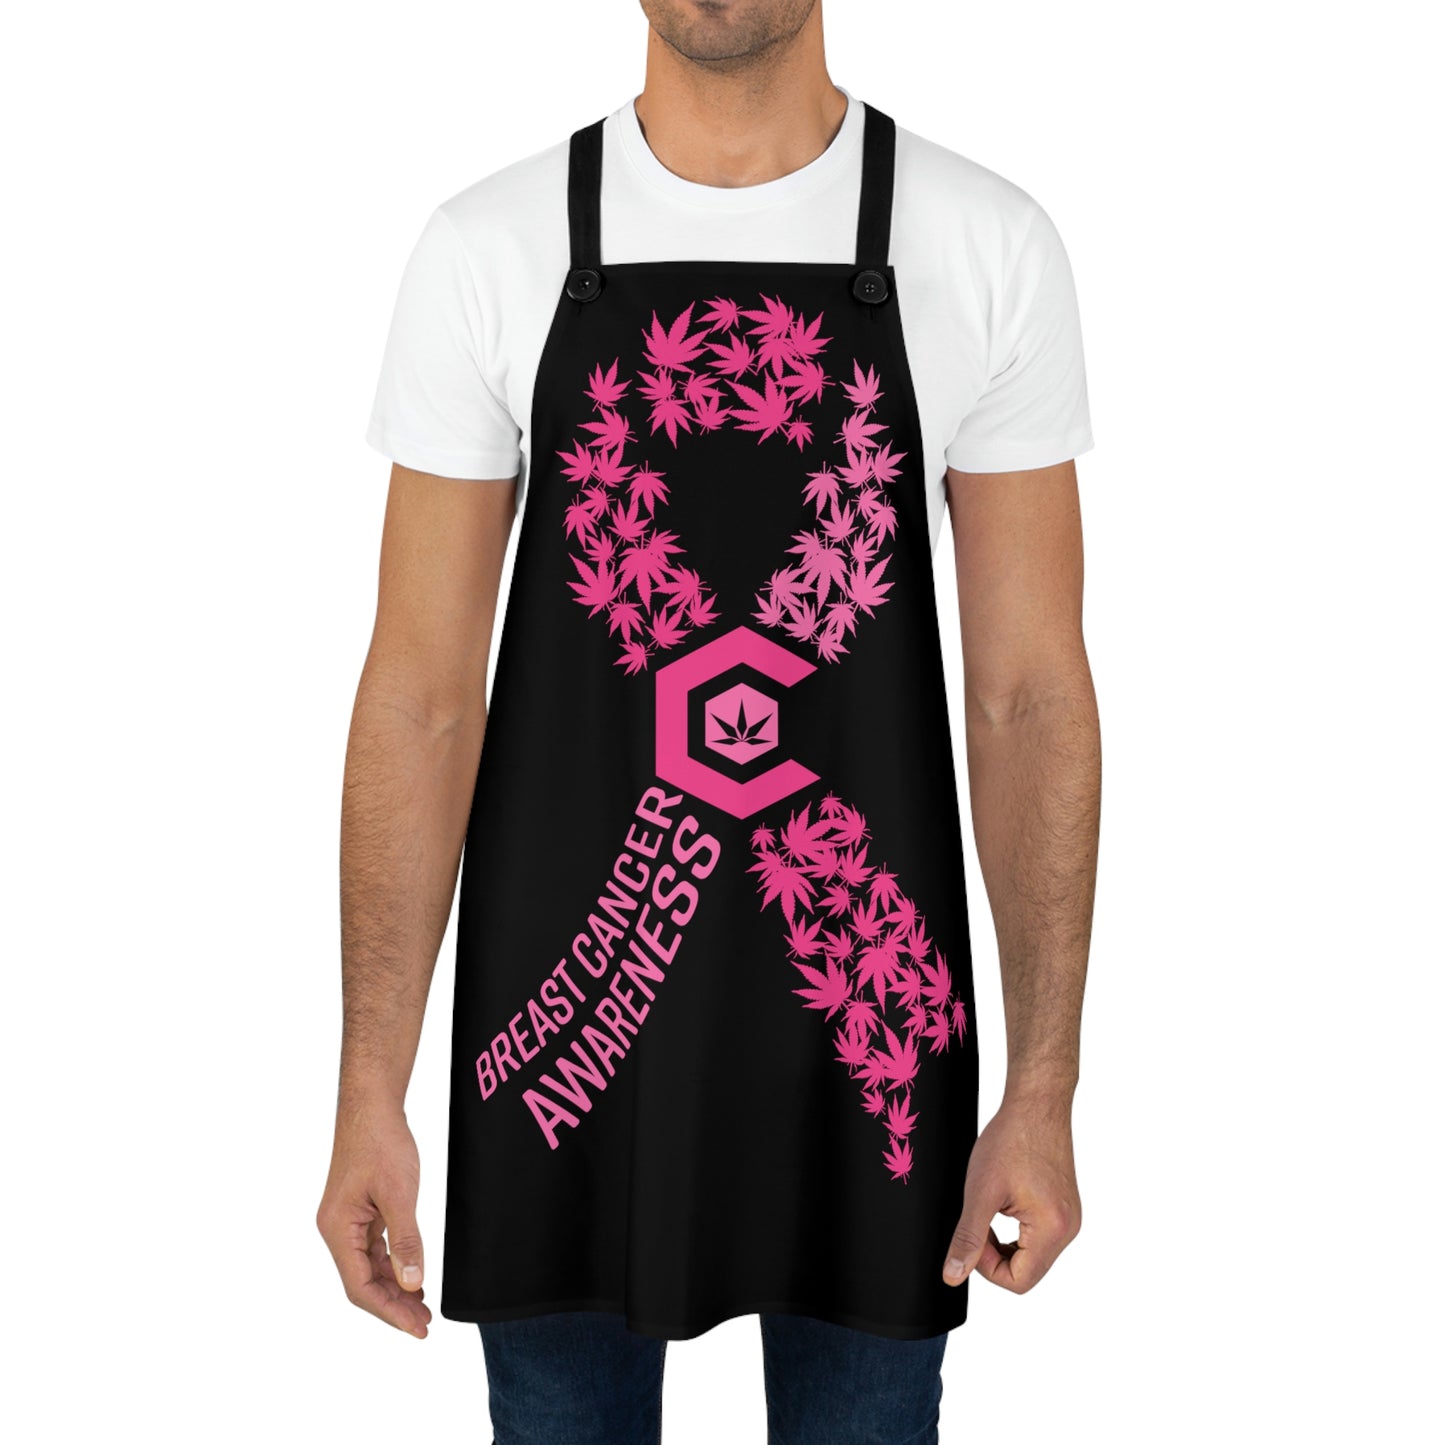 A man wearing the Breast Cancer Awareness Chef's Apron with a C in the middle surrounding the weed leaf with pink cannabis leaves